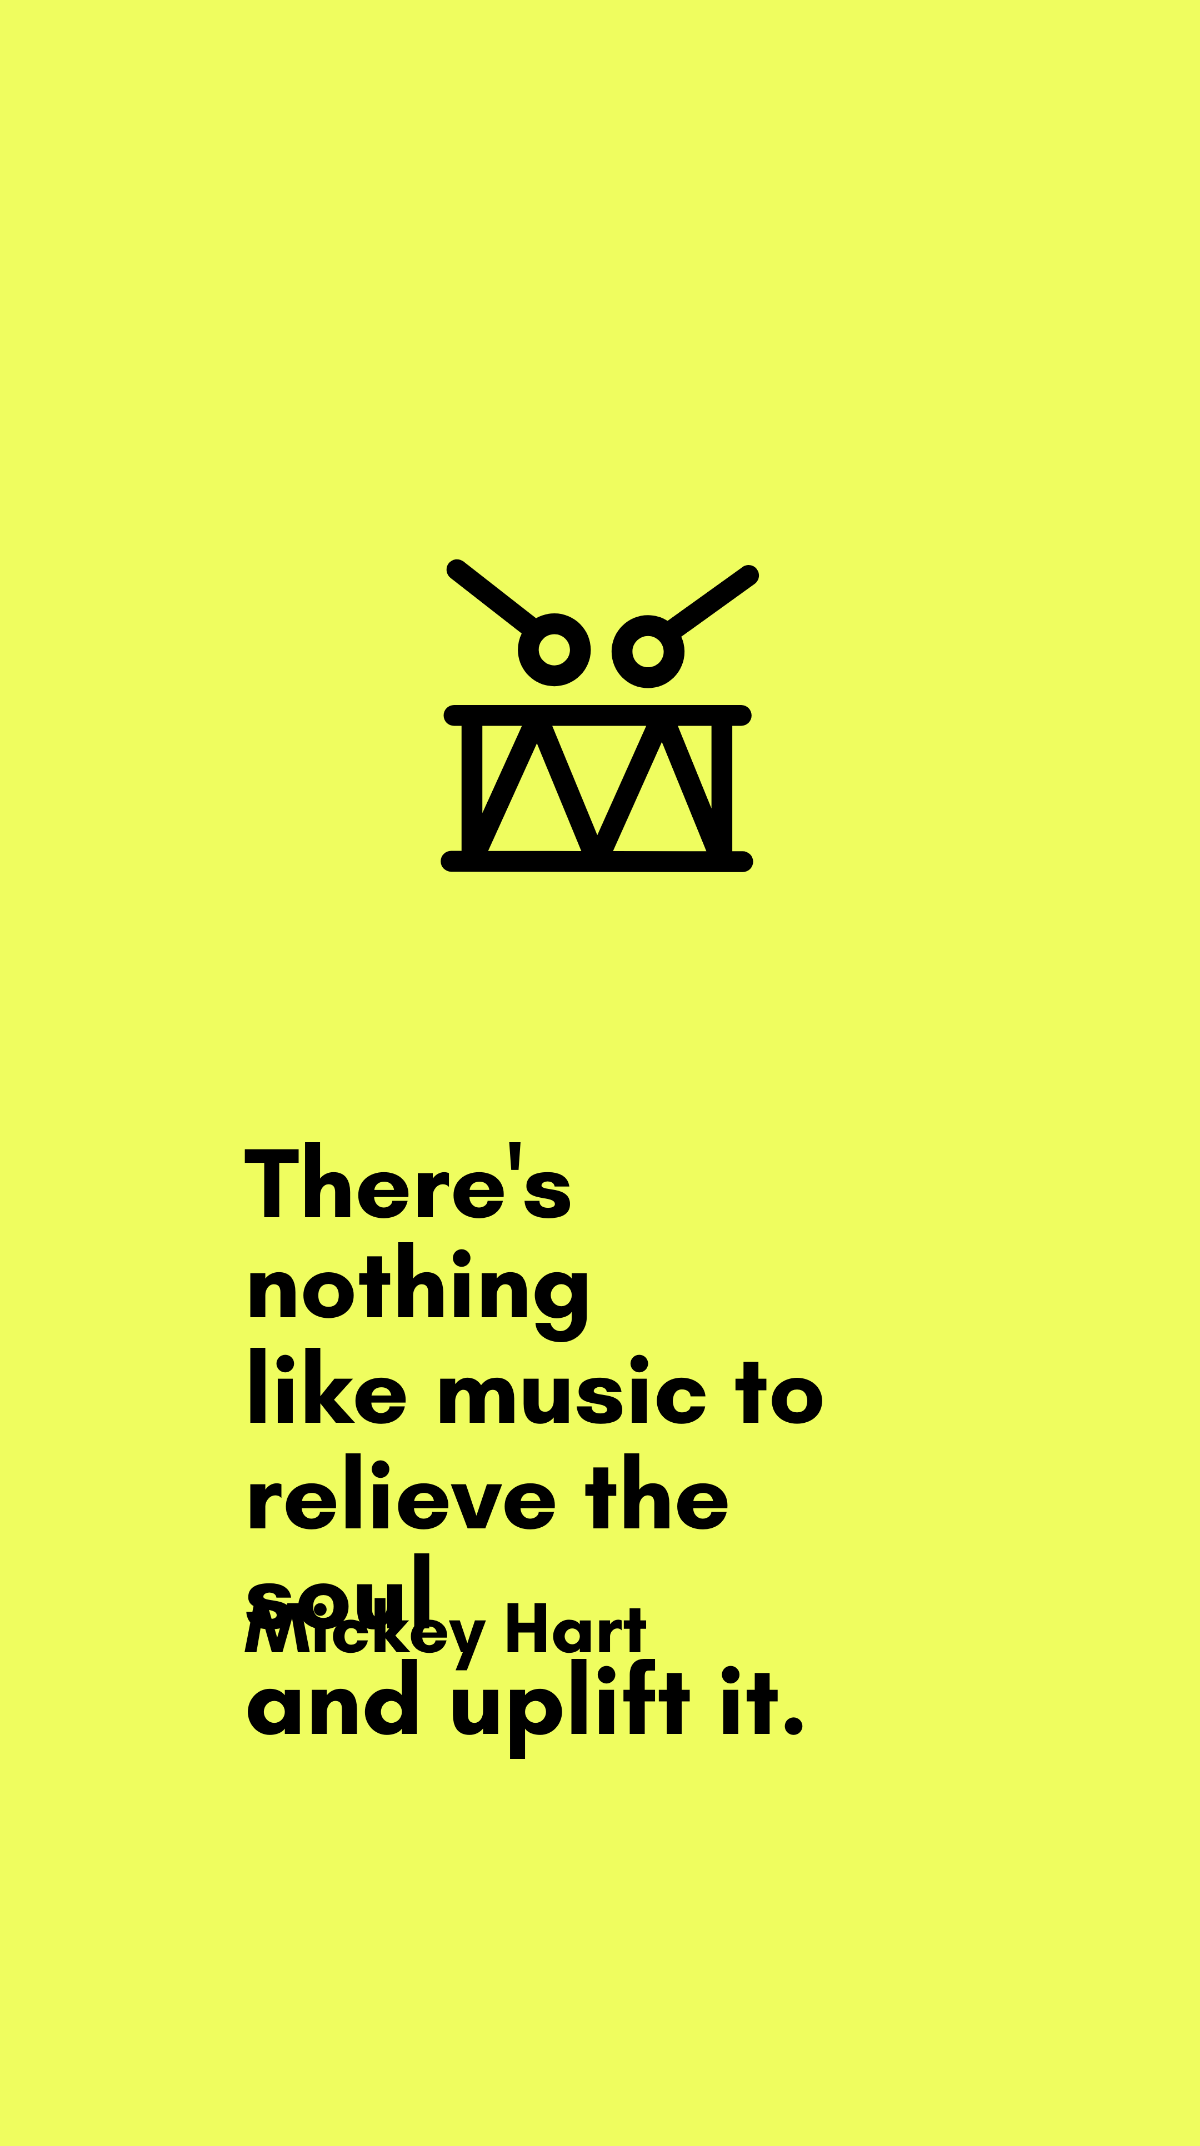 Mickey Hart - There's nothing like music to relieve the soul and uplift it. Template